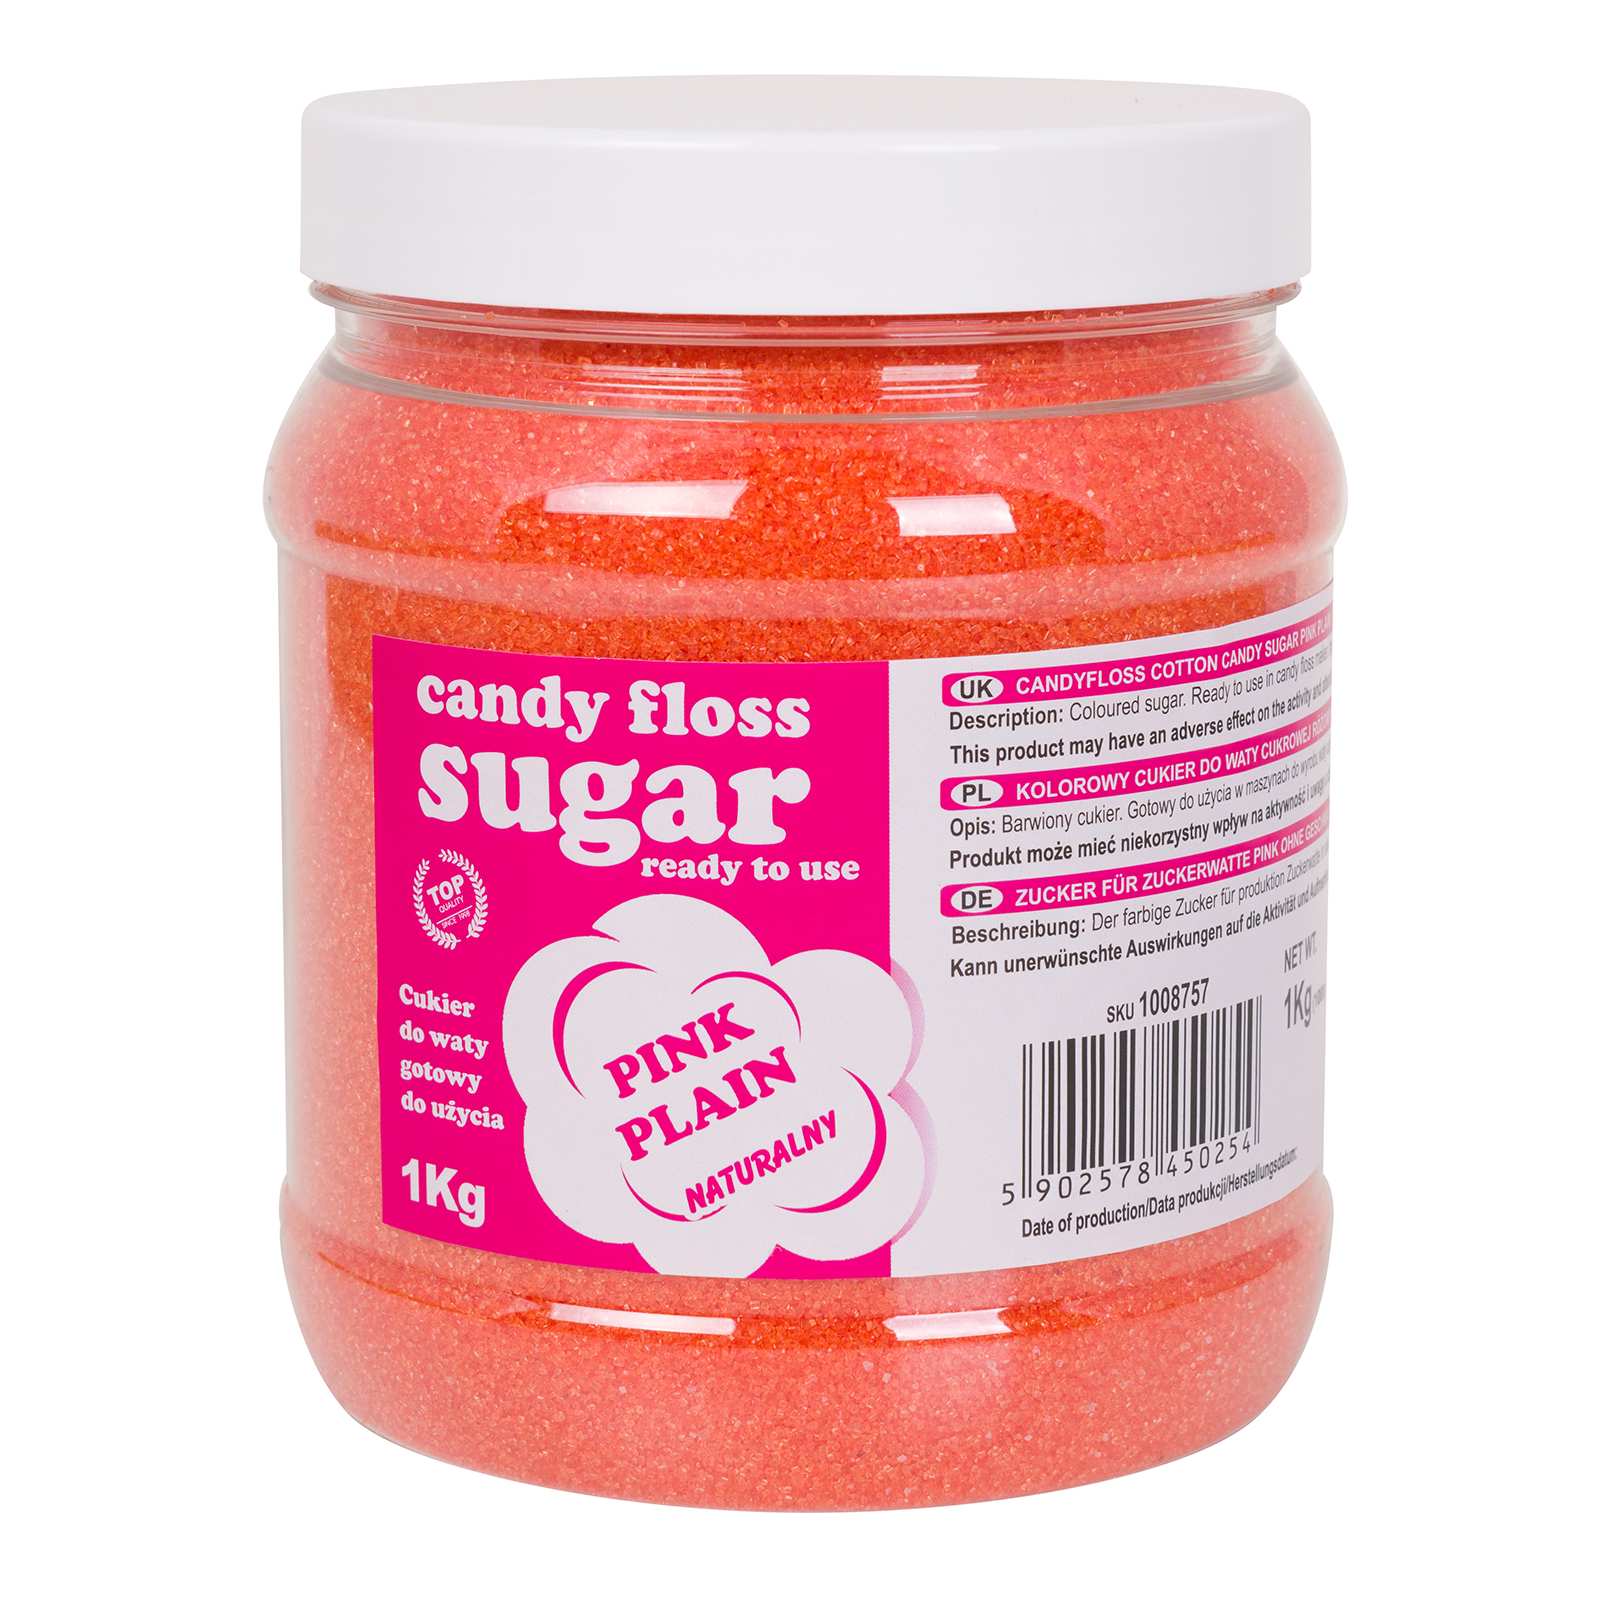 Cotton Candy Flossugar Ready To Use 1kg Fun Food Consumables 6706